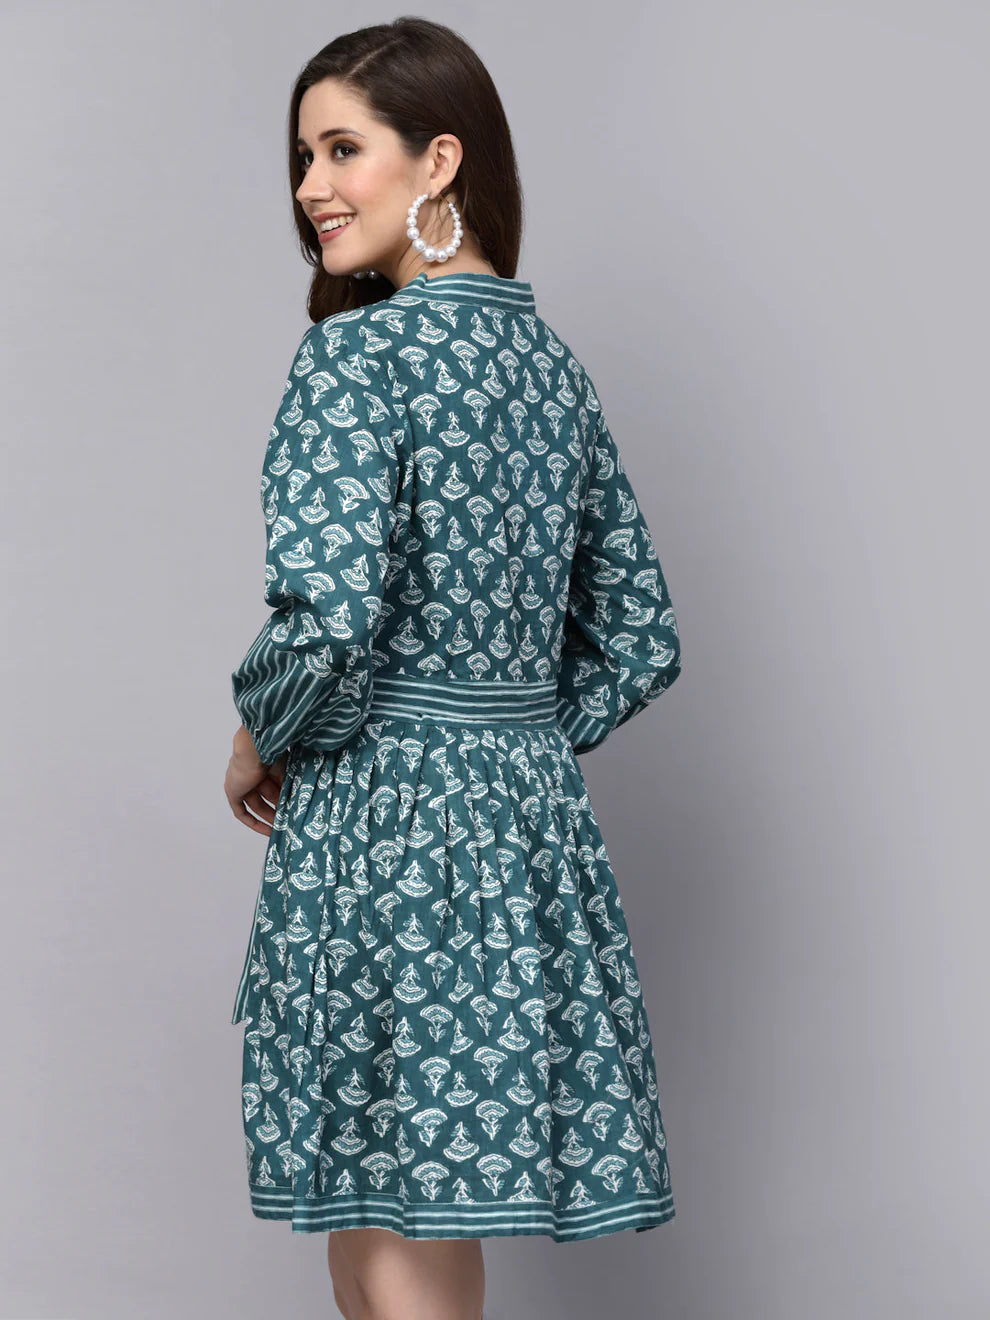 Printed, front tied bluish-green dress